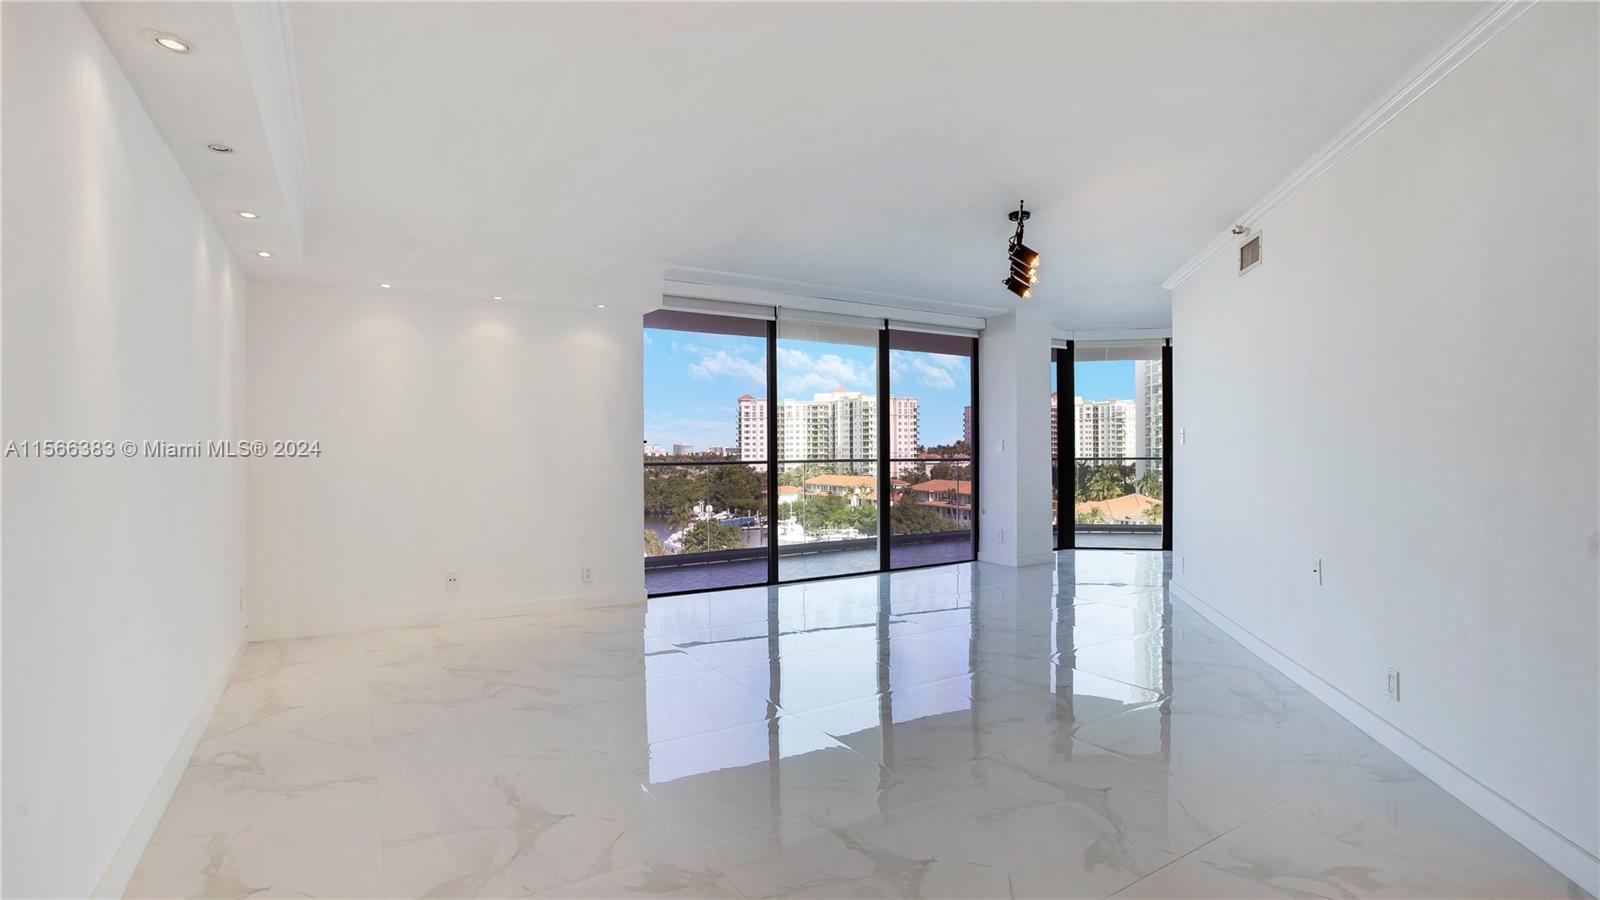 Welcome to your dream home! Stunning unit, expansive floor-to-ceiling windows, offering breathtaking